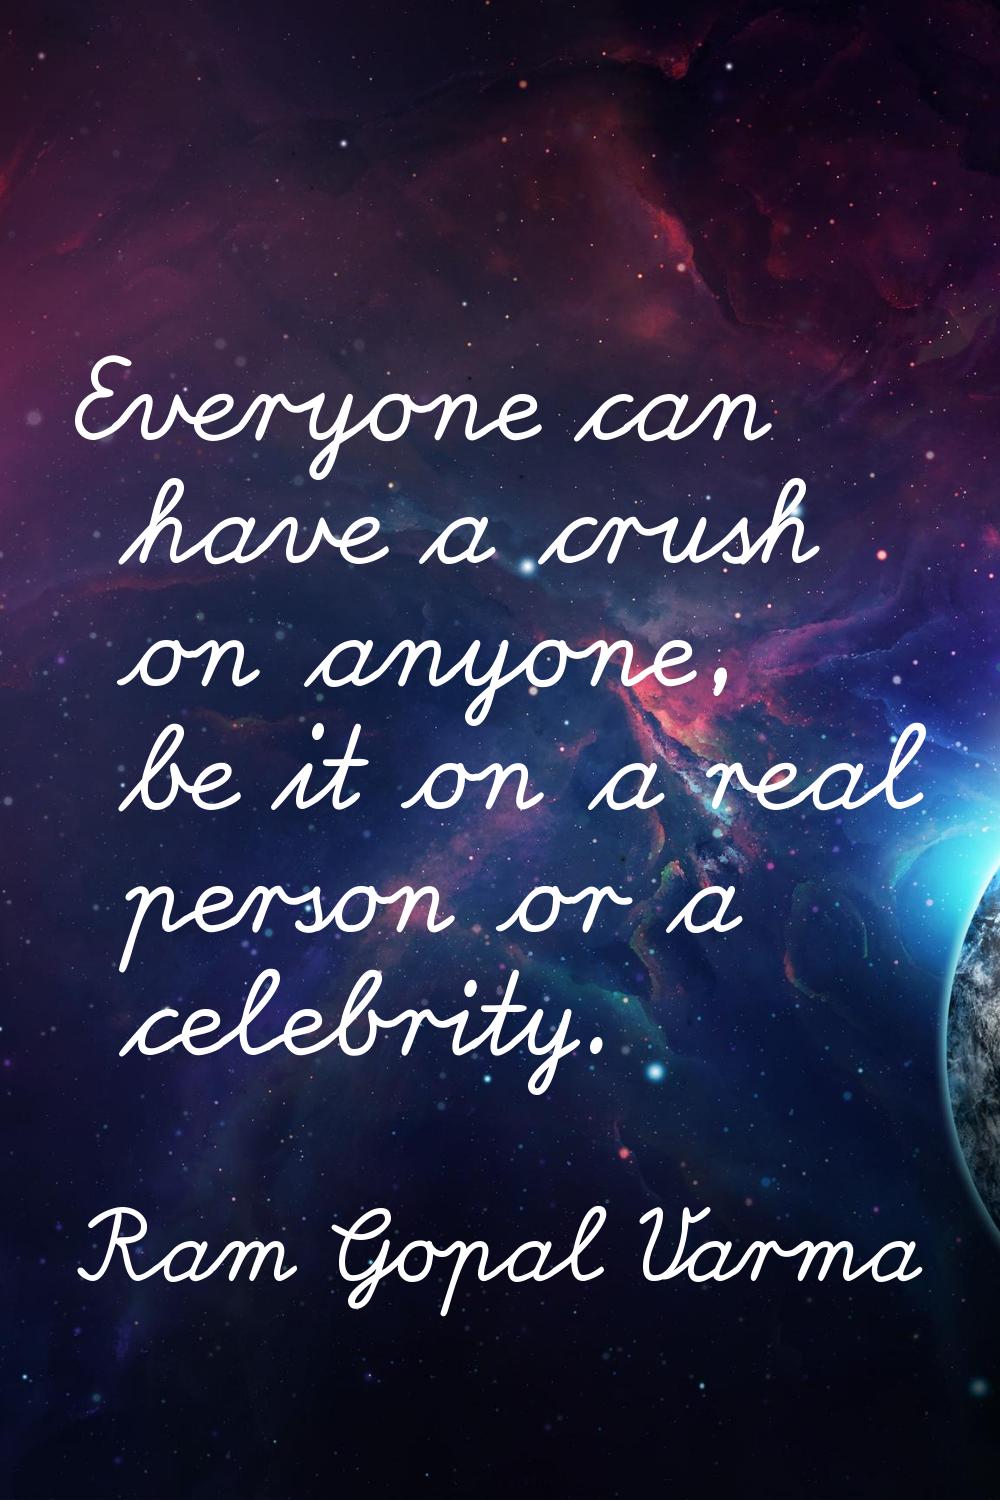 Everyone can have a crush on anyone, be it on a real person or a celebrity.